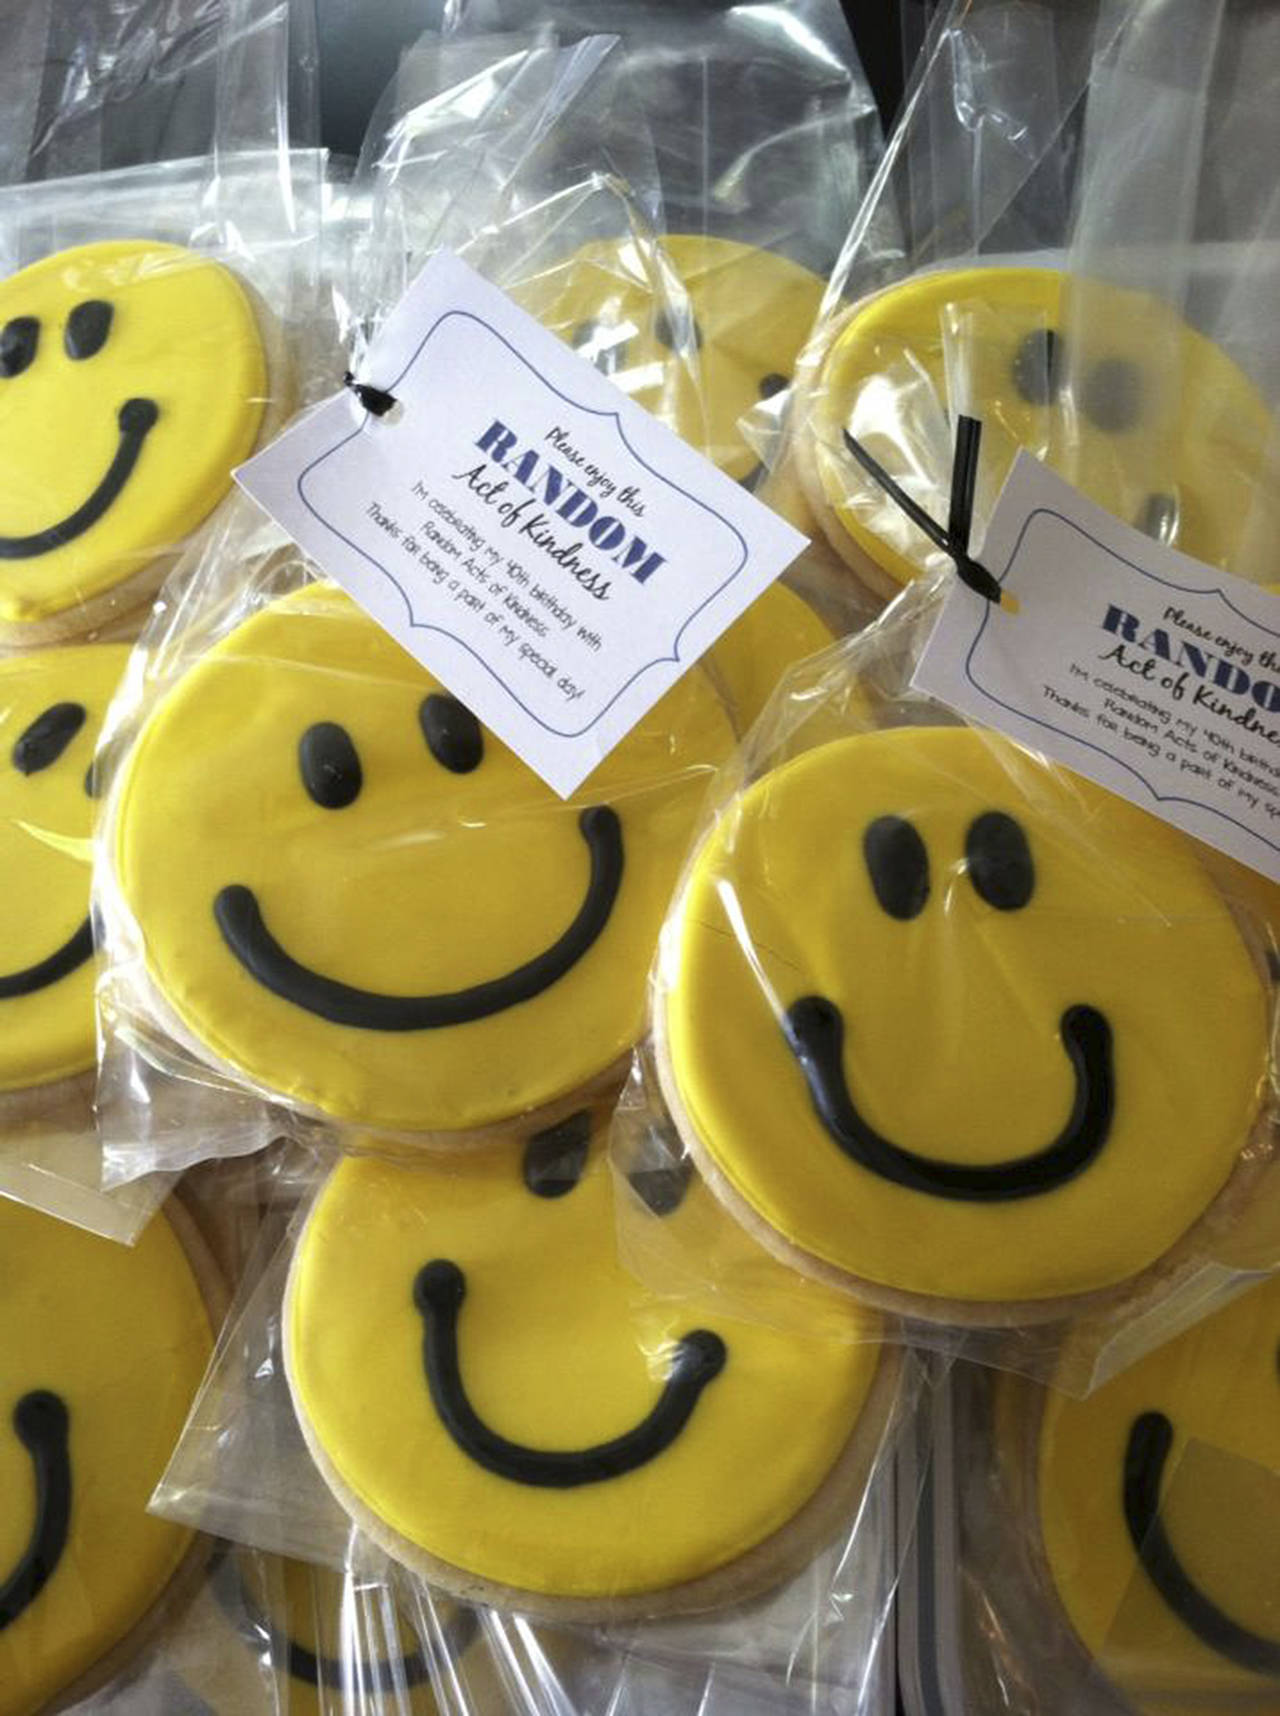 Kristi Black                                 Kristi Black’s homemade cookies bring smiles when she gives them as a random act of kindness.